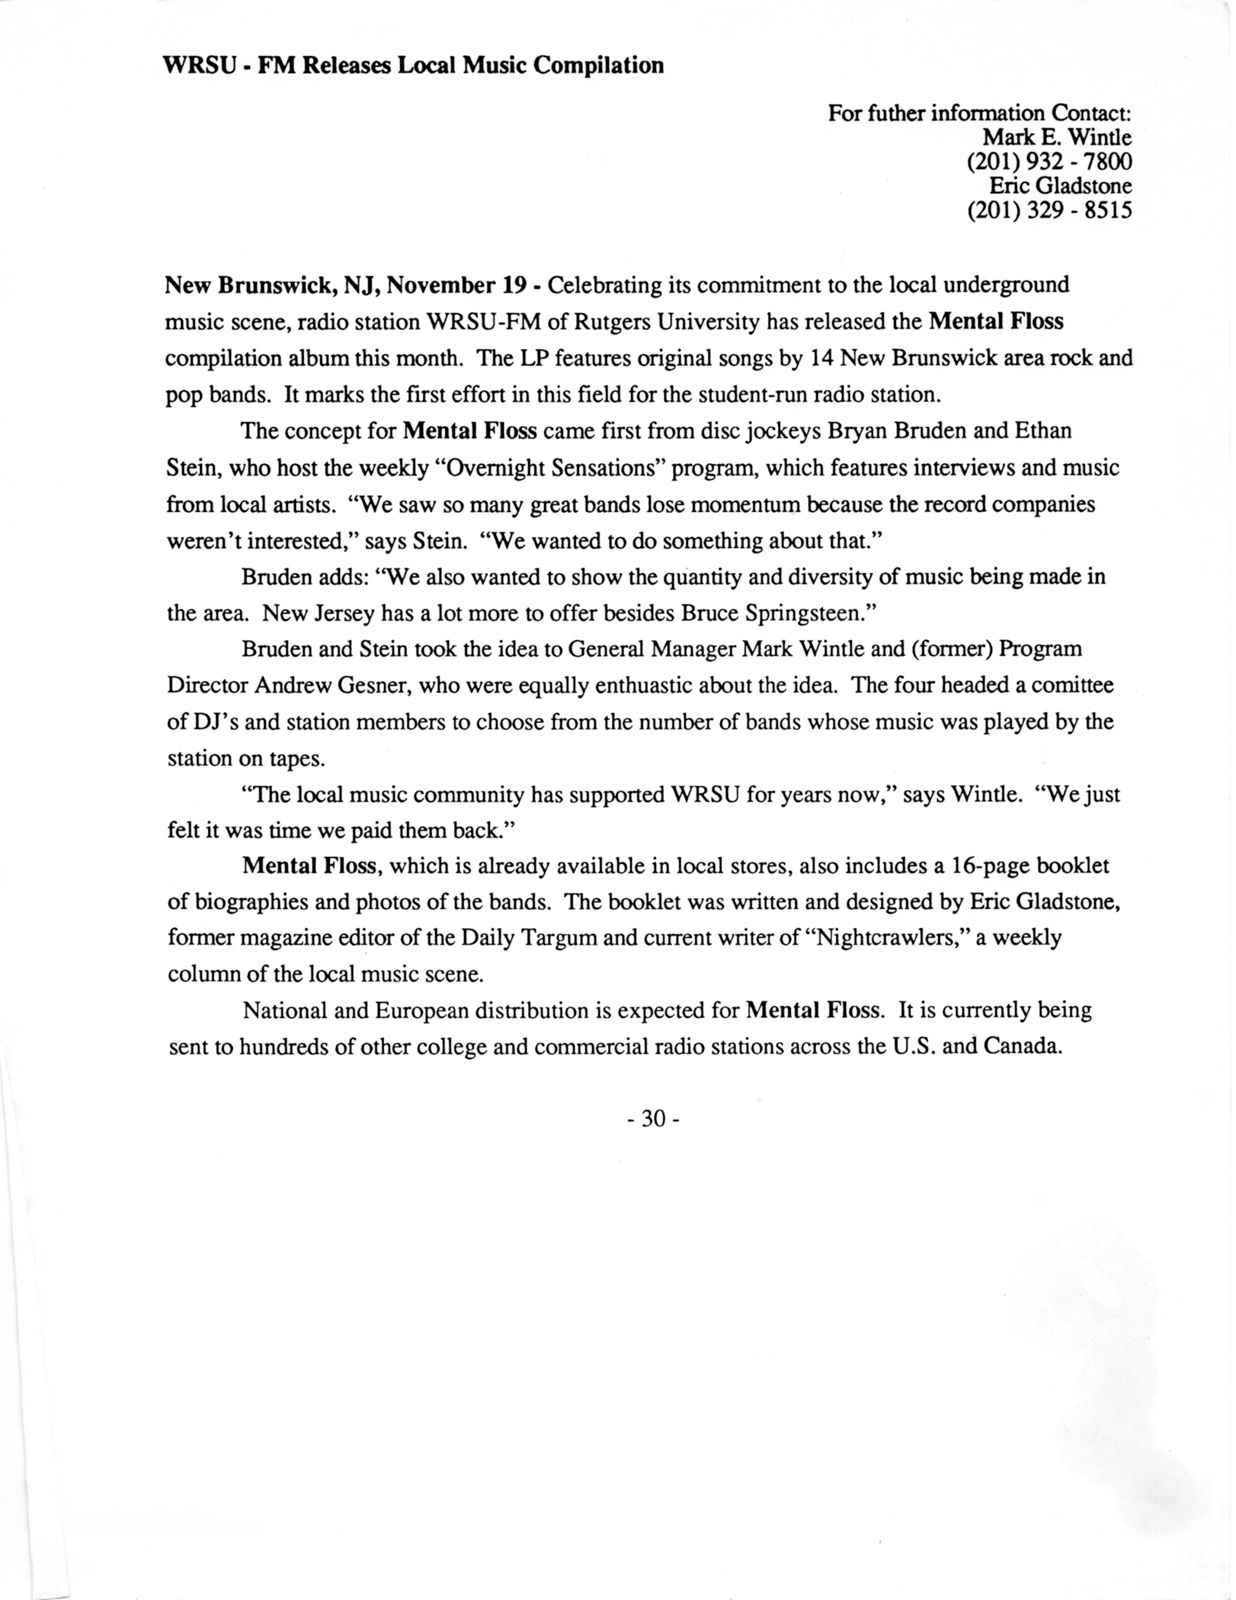 1987 - Mental Floss Record - Press Release by Mark Wintle and Eric Gladstone